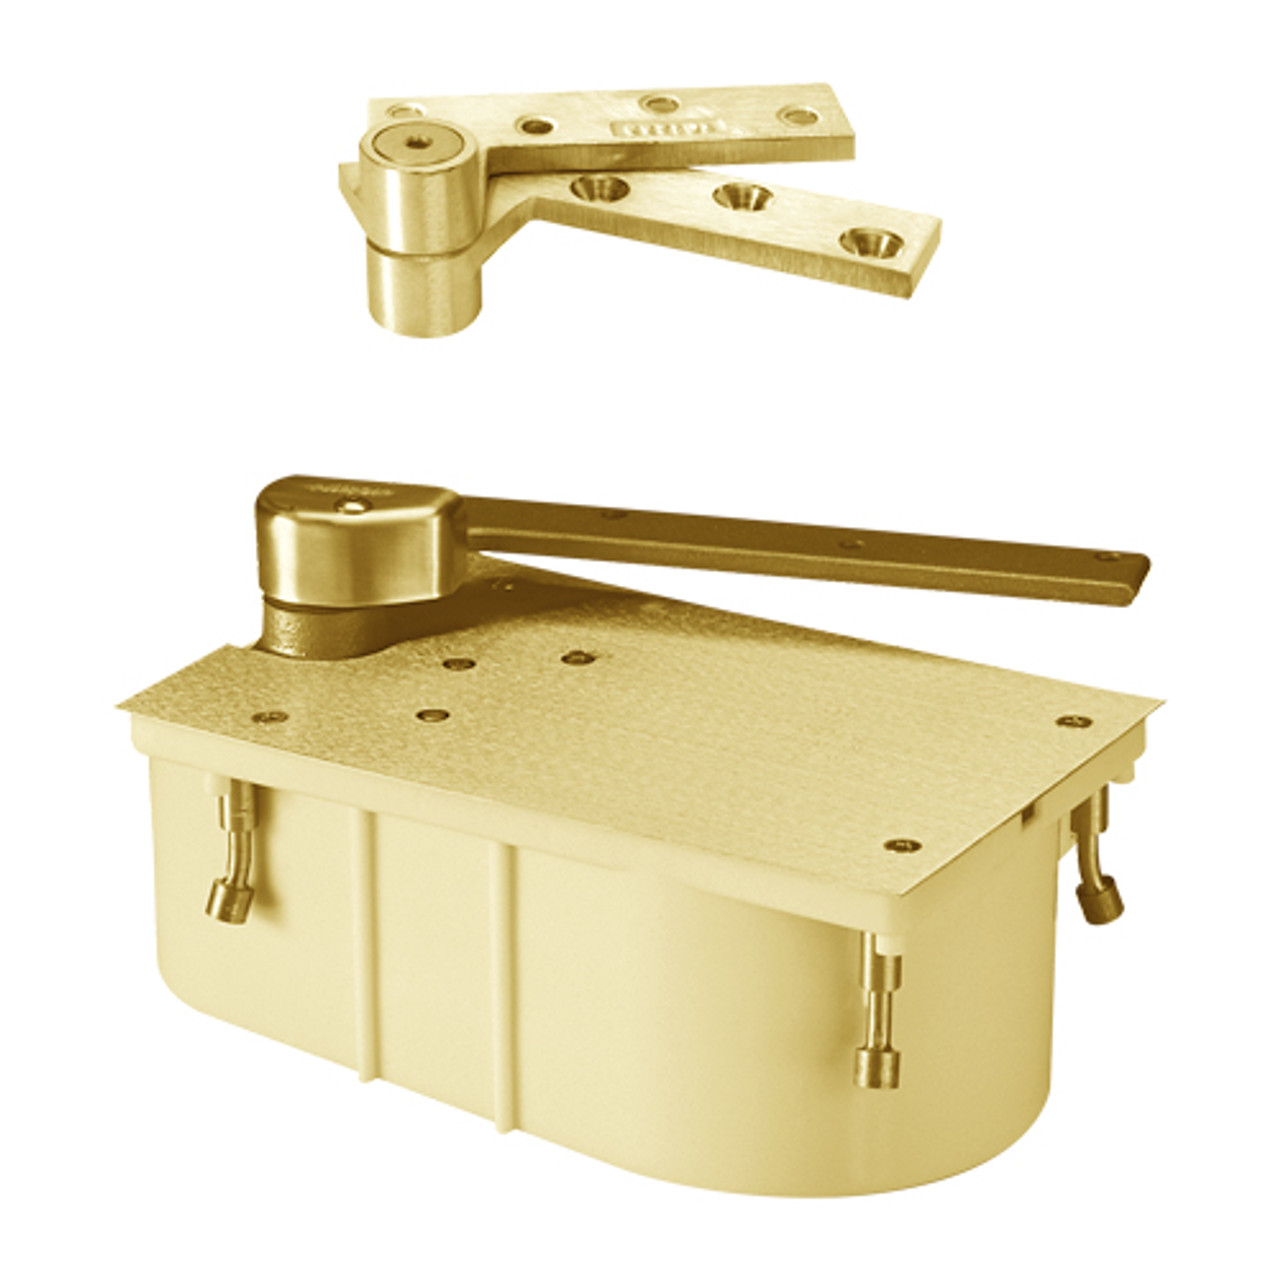 27-85S-LFP-CWF-LH-605 Rixson 27 Series Heavy Duty 3/4" Offset Hung Floor Closer in Bright Brass Finish